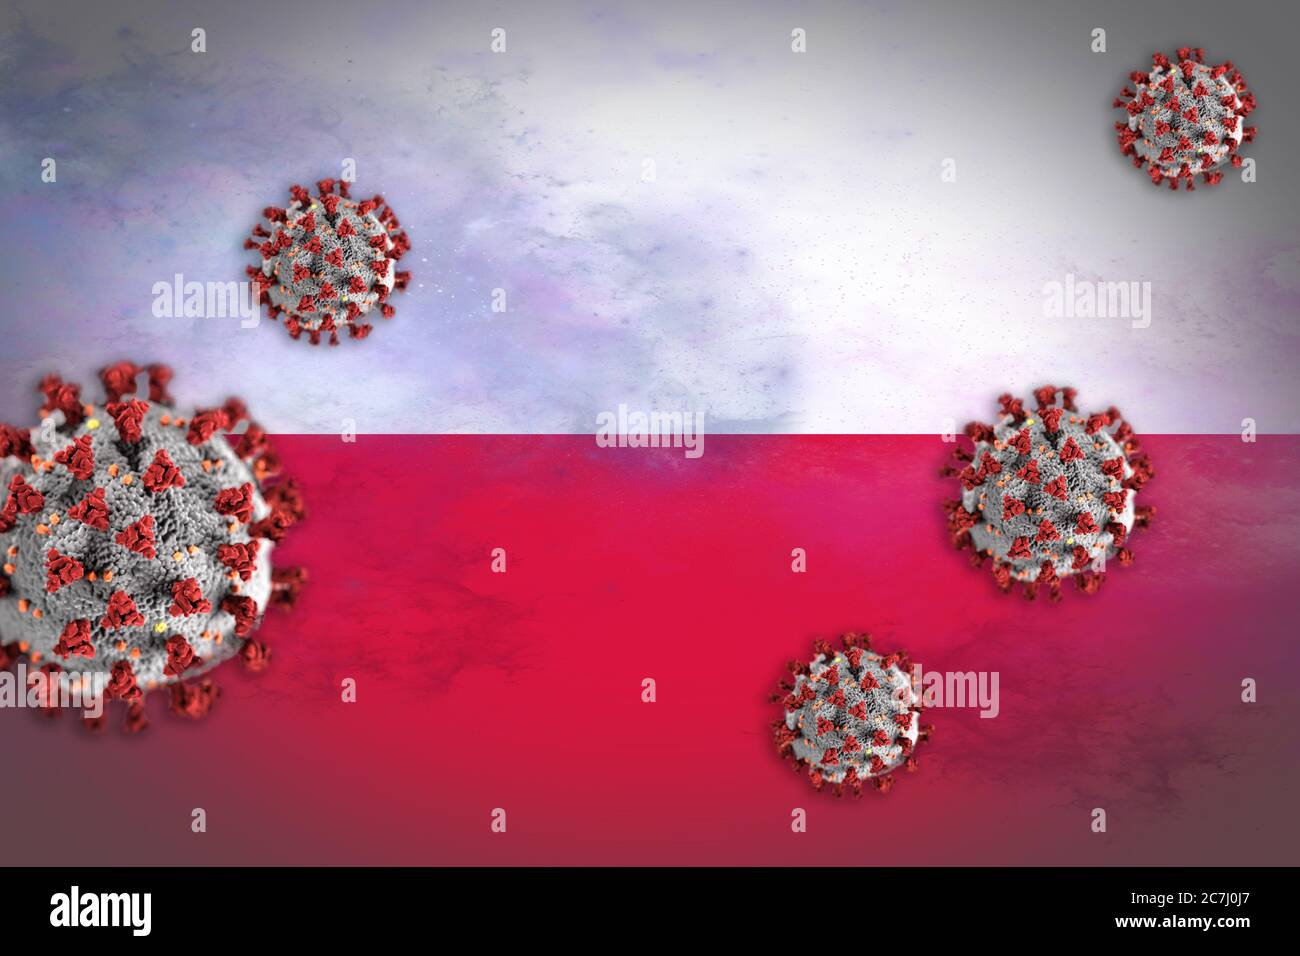 Concept of Coronavirus or Covid-19 particles overshadowing flag of Poland symbolising outbreak. Stock Photo